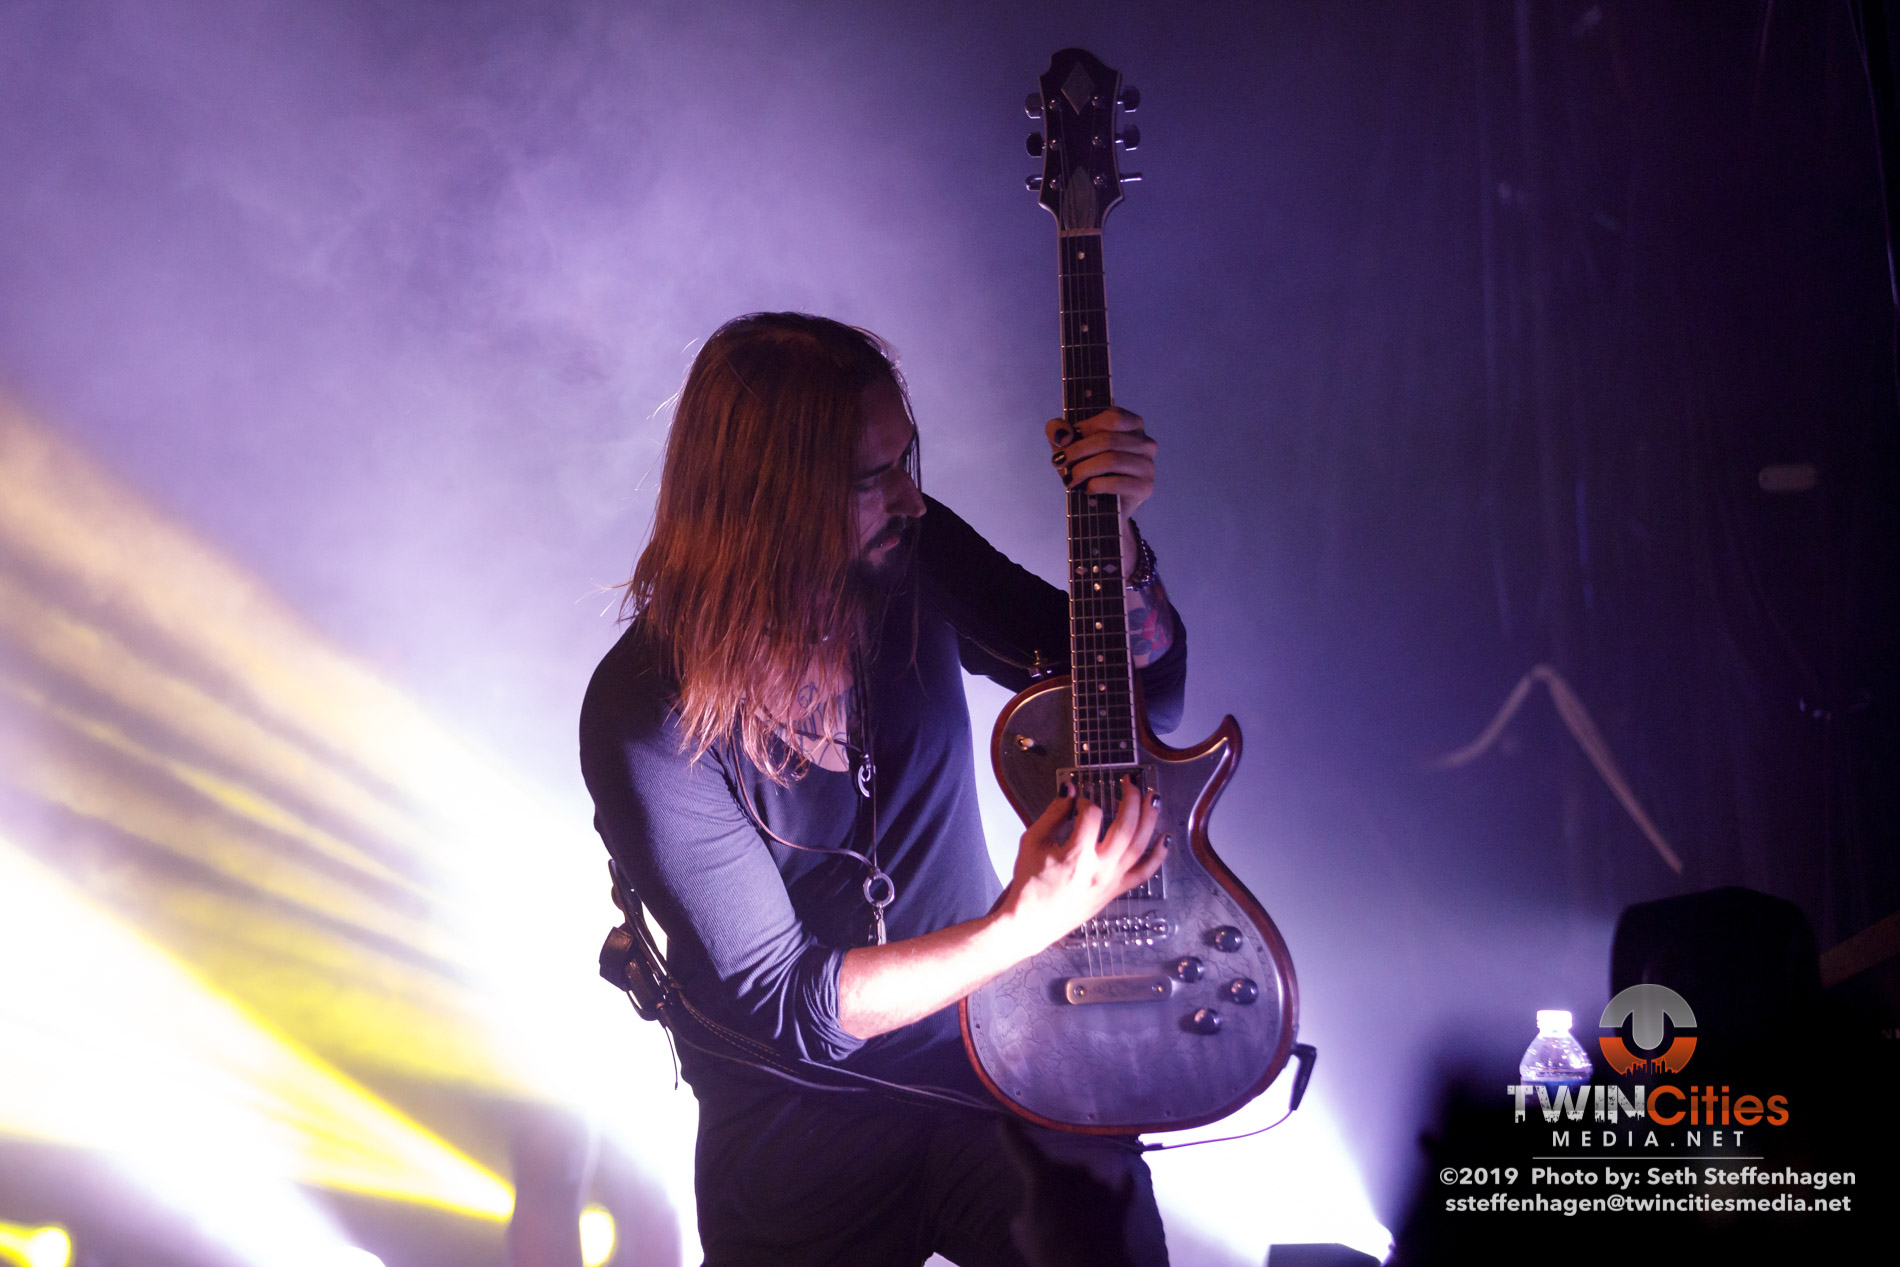 October 5, 2019 - Minneapolis, Minnesota, United States -  Eluveitie live in concert at The Cabooze co-headlining with Korpiklaani and with Gone In April as the openers.

(Photo by Seth Steffenhagen/Steffenhagen Photography)